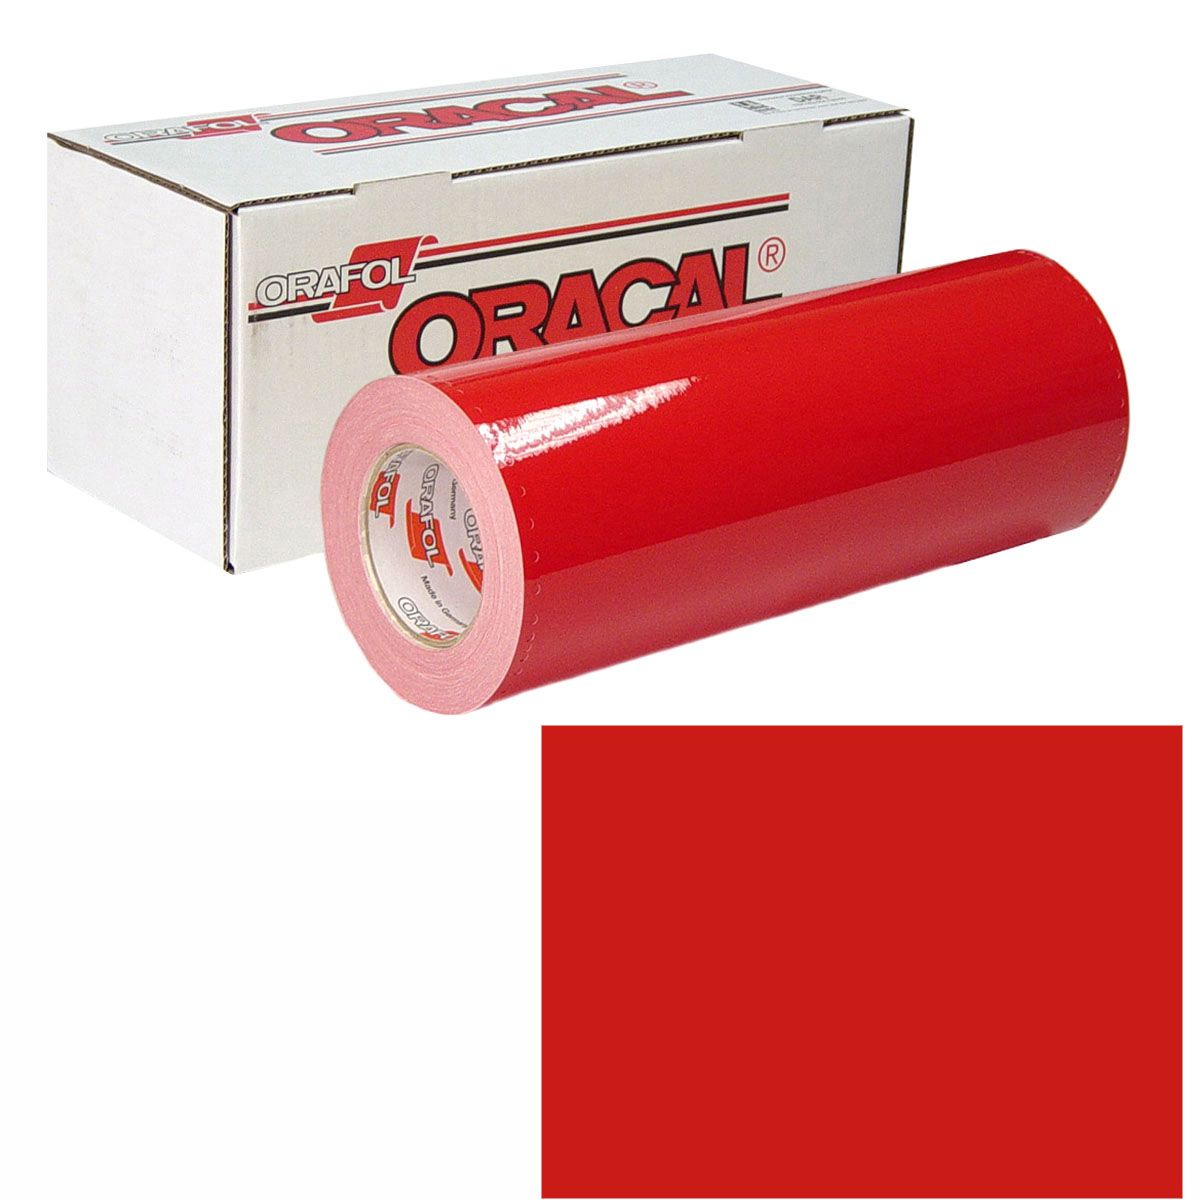 ORACAL 951 15in X 10yd 324 Blood Red